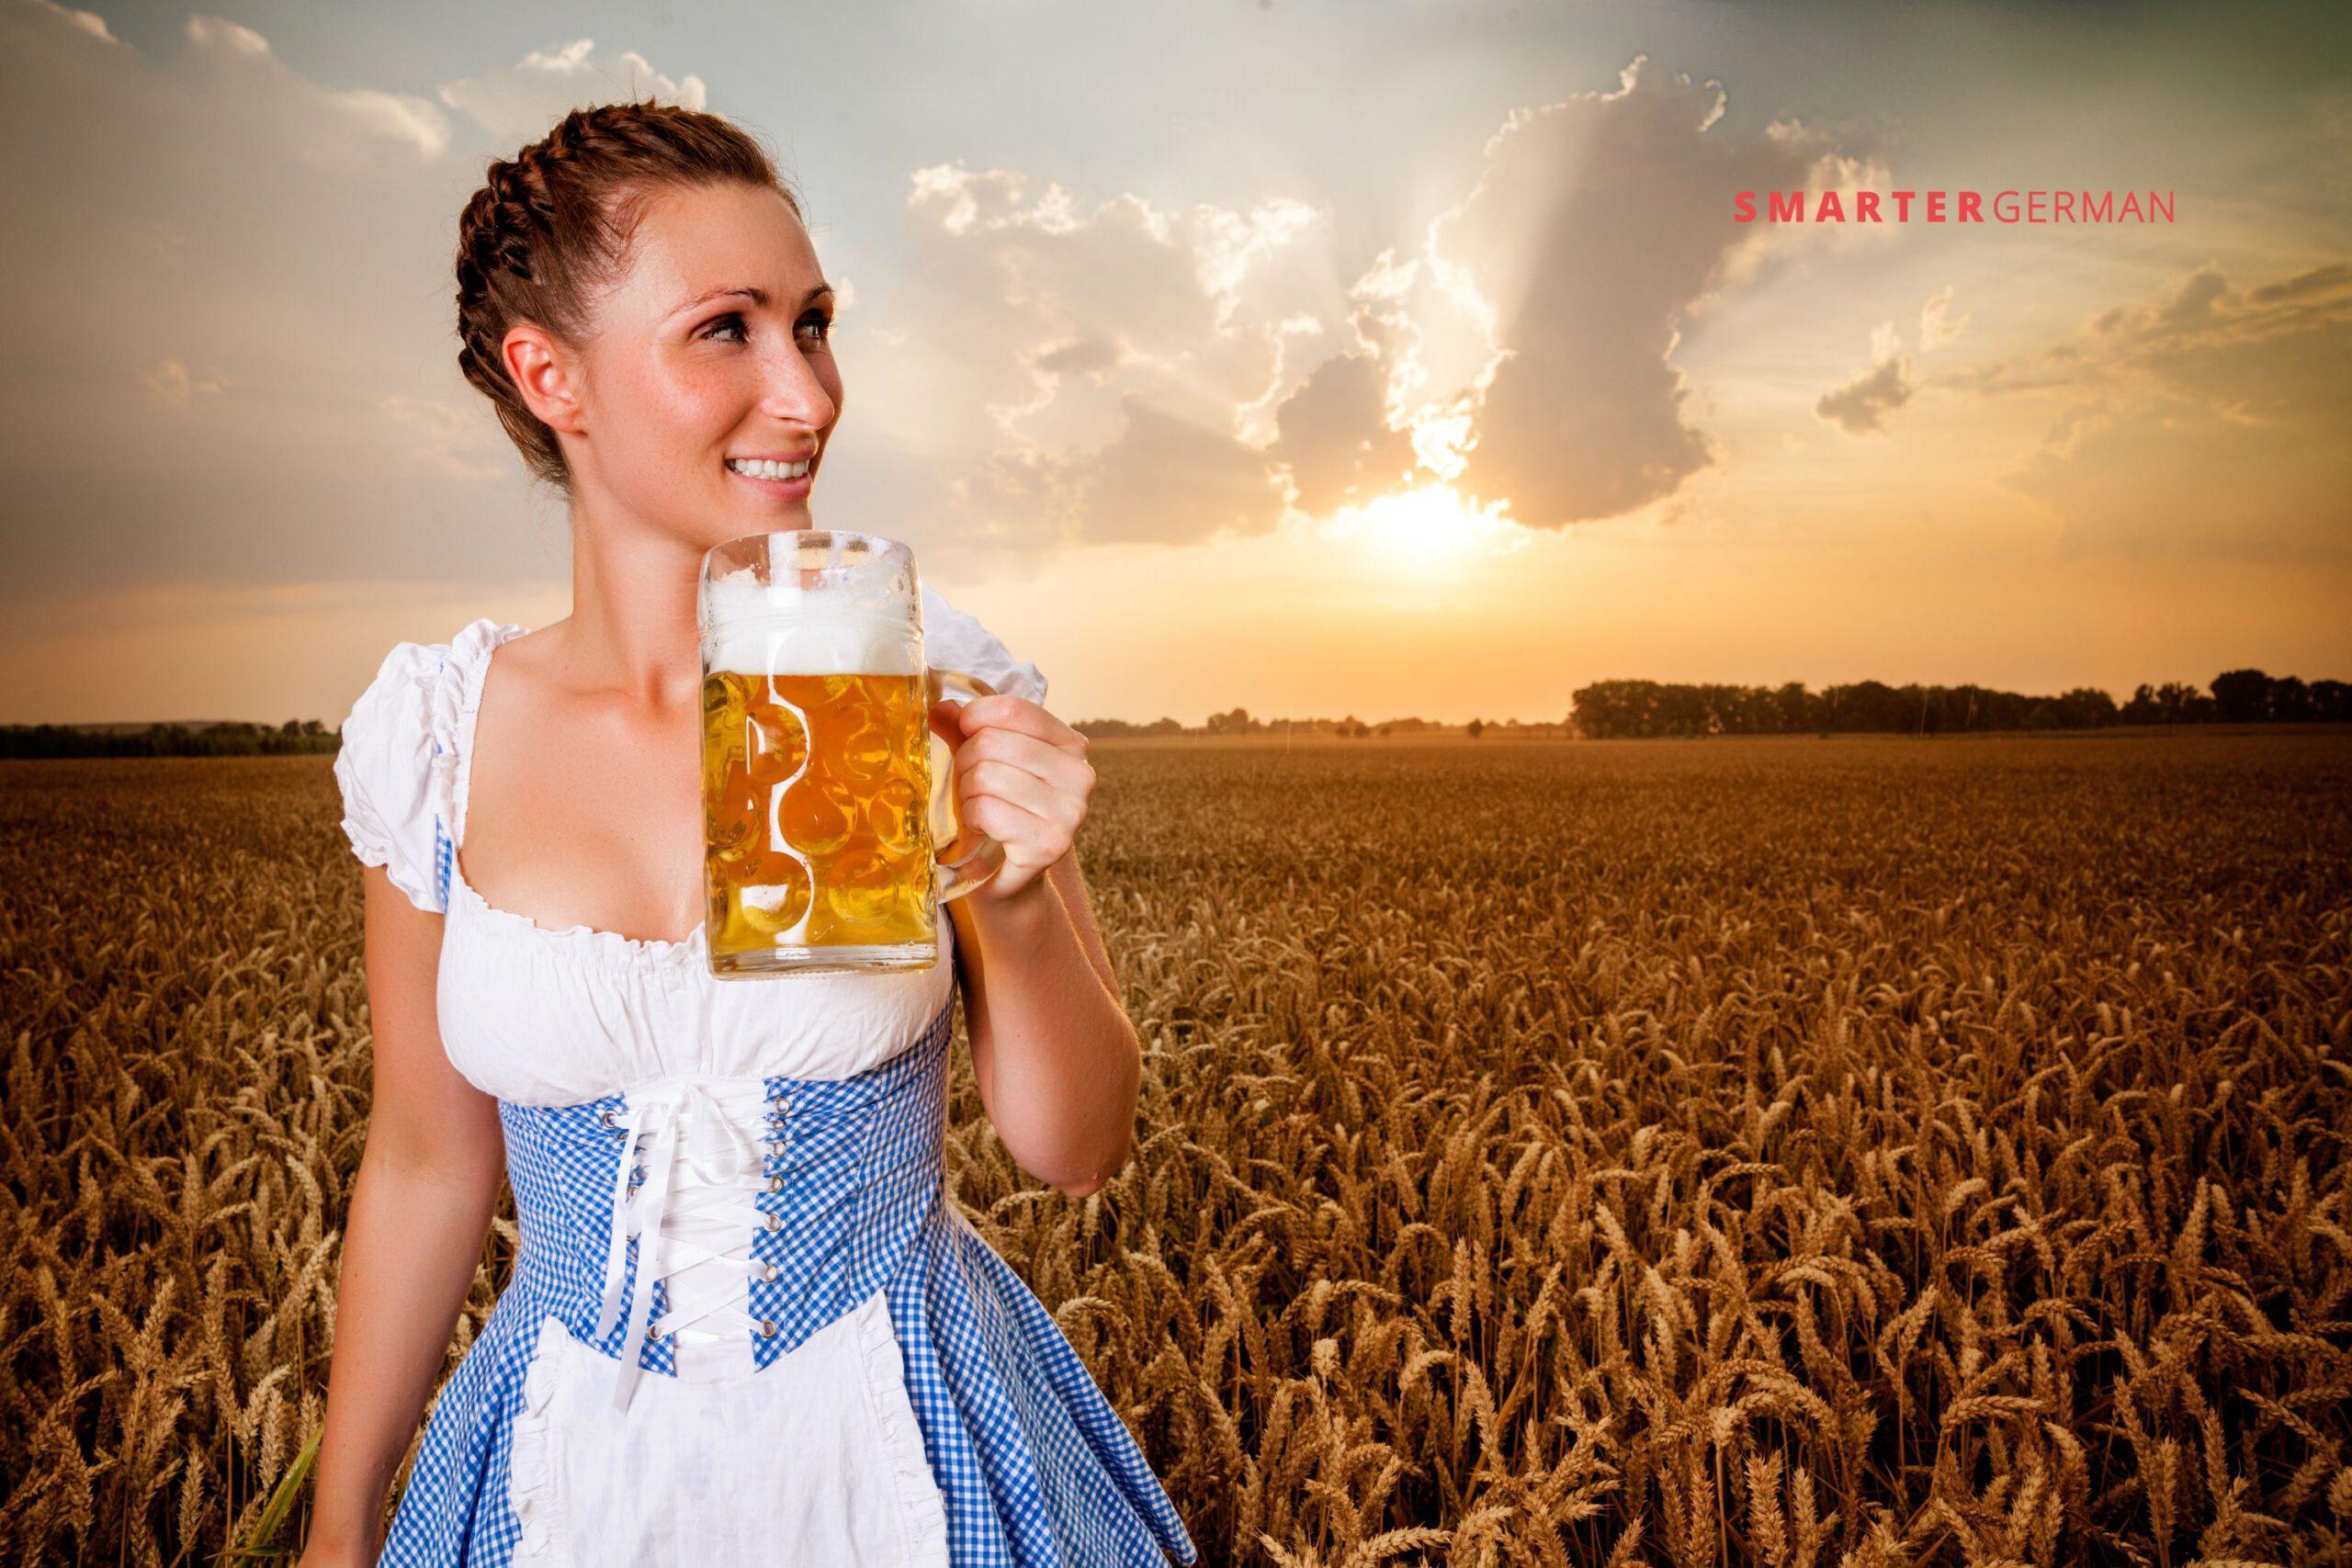 German woman with a beer